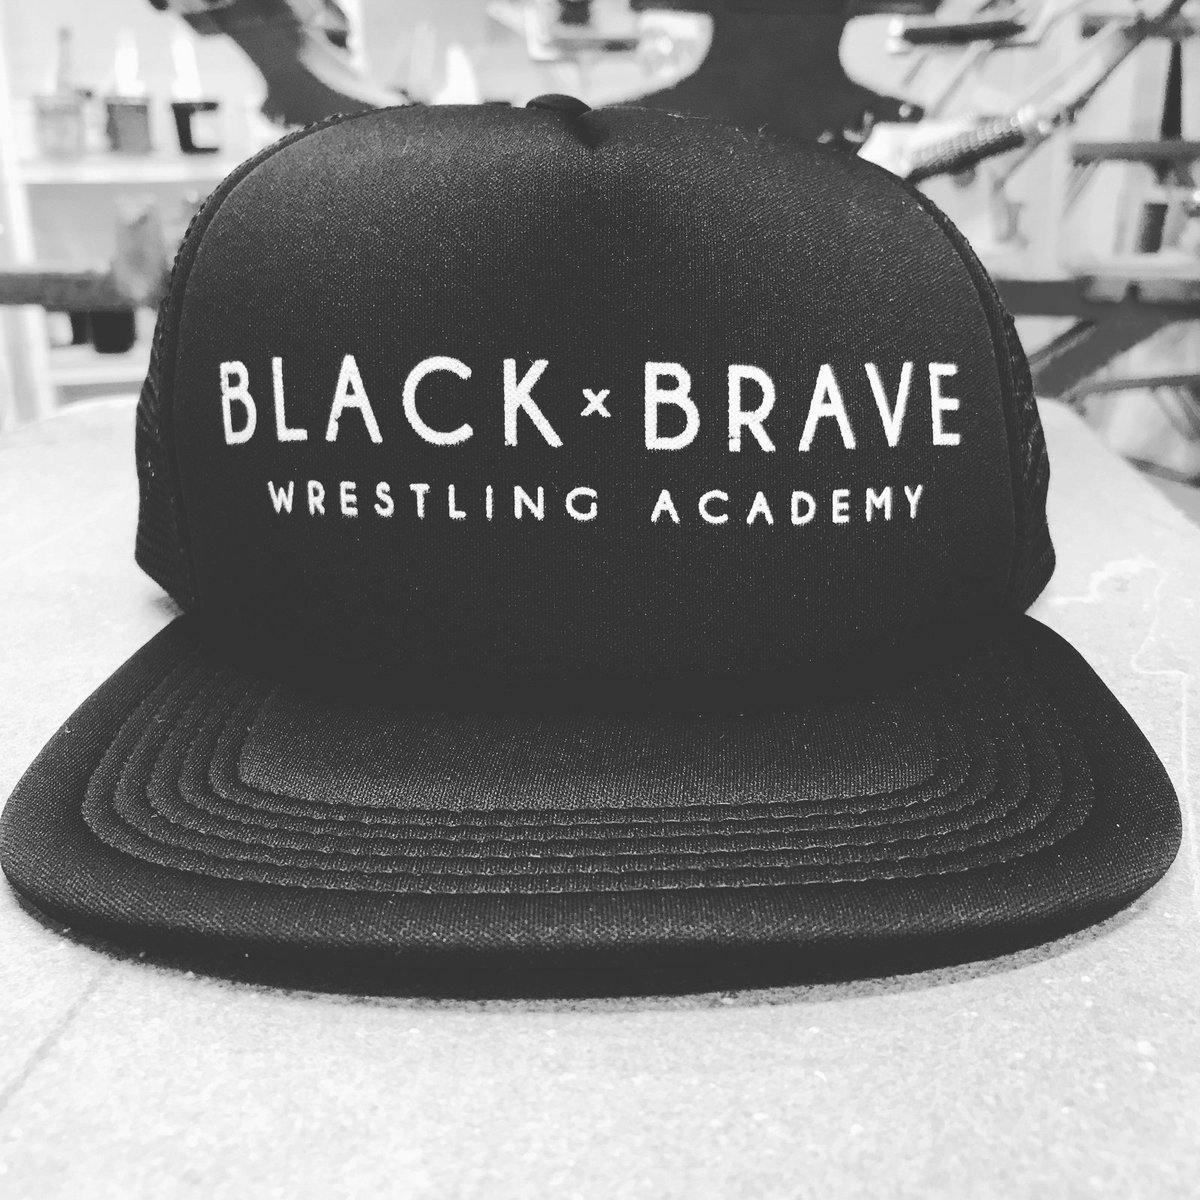 Blackbrave On Twitter Are You Ready The Vanswarpedtour Starts Tomorrow Make Sure Youre Following Our Awesome Merch Girl Renee_signore For Updates Info Httpstcom6st2rryrz